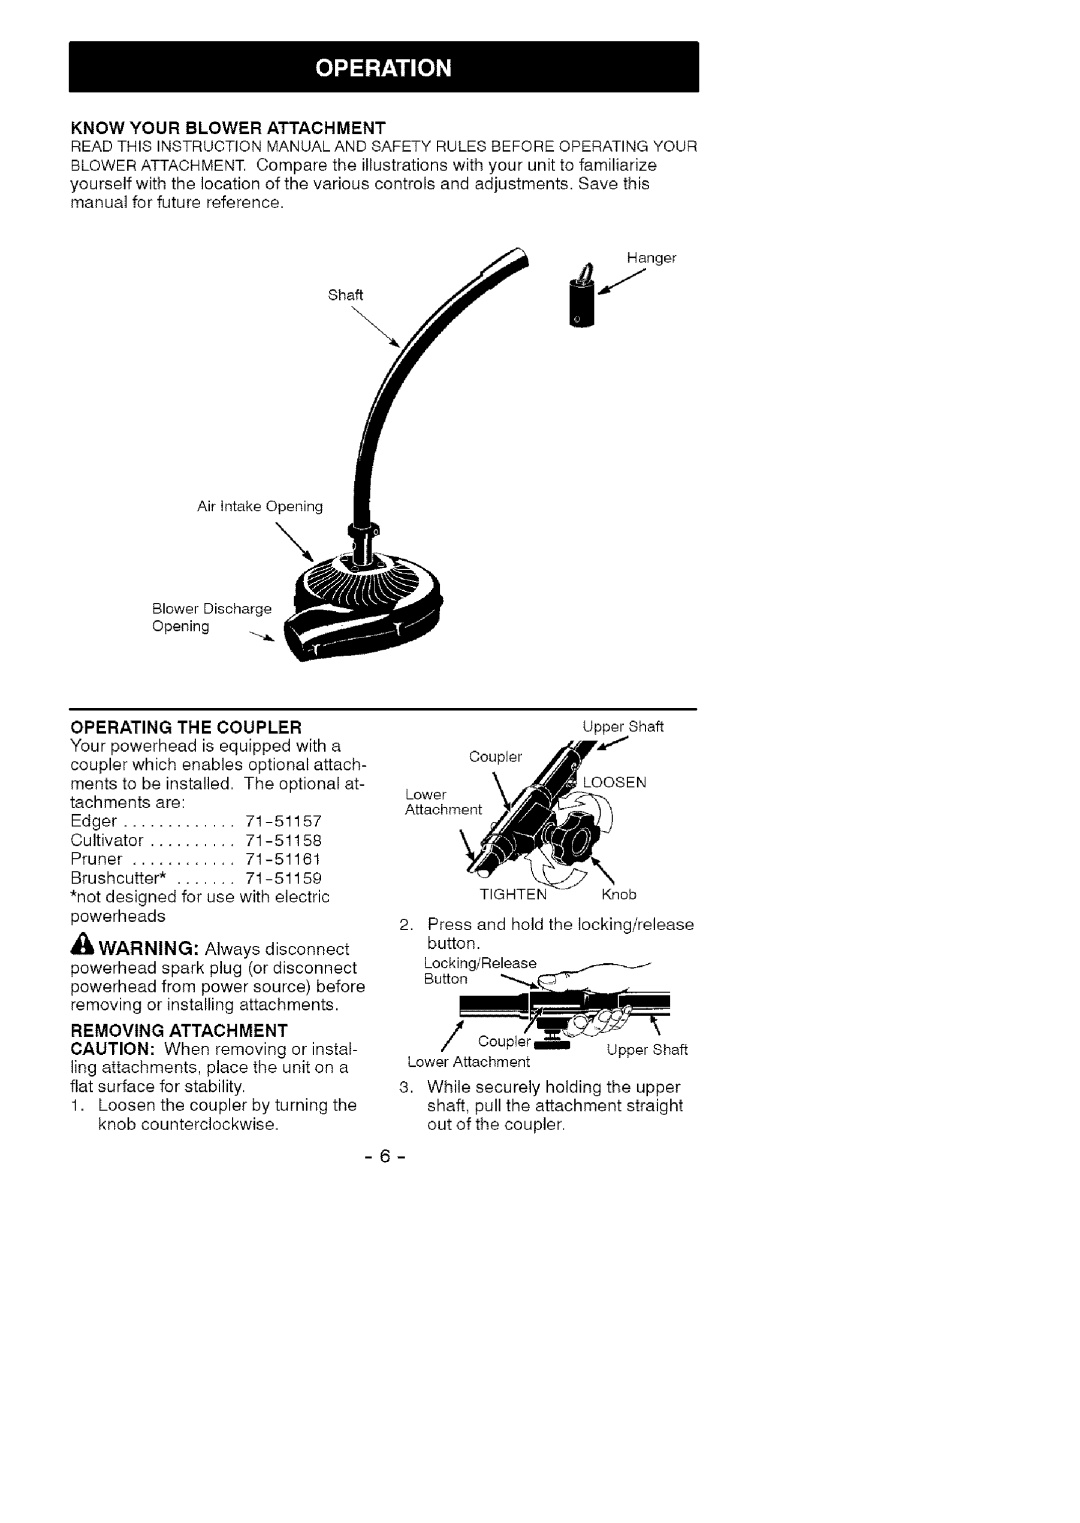 Craftsman C944.511601 instruction manual Know Your Blower Attachment, Operating The Coupler 